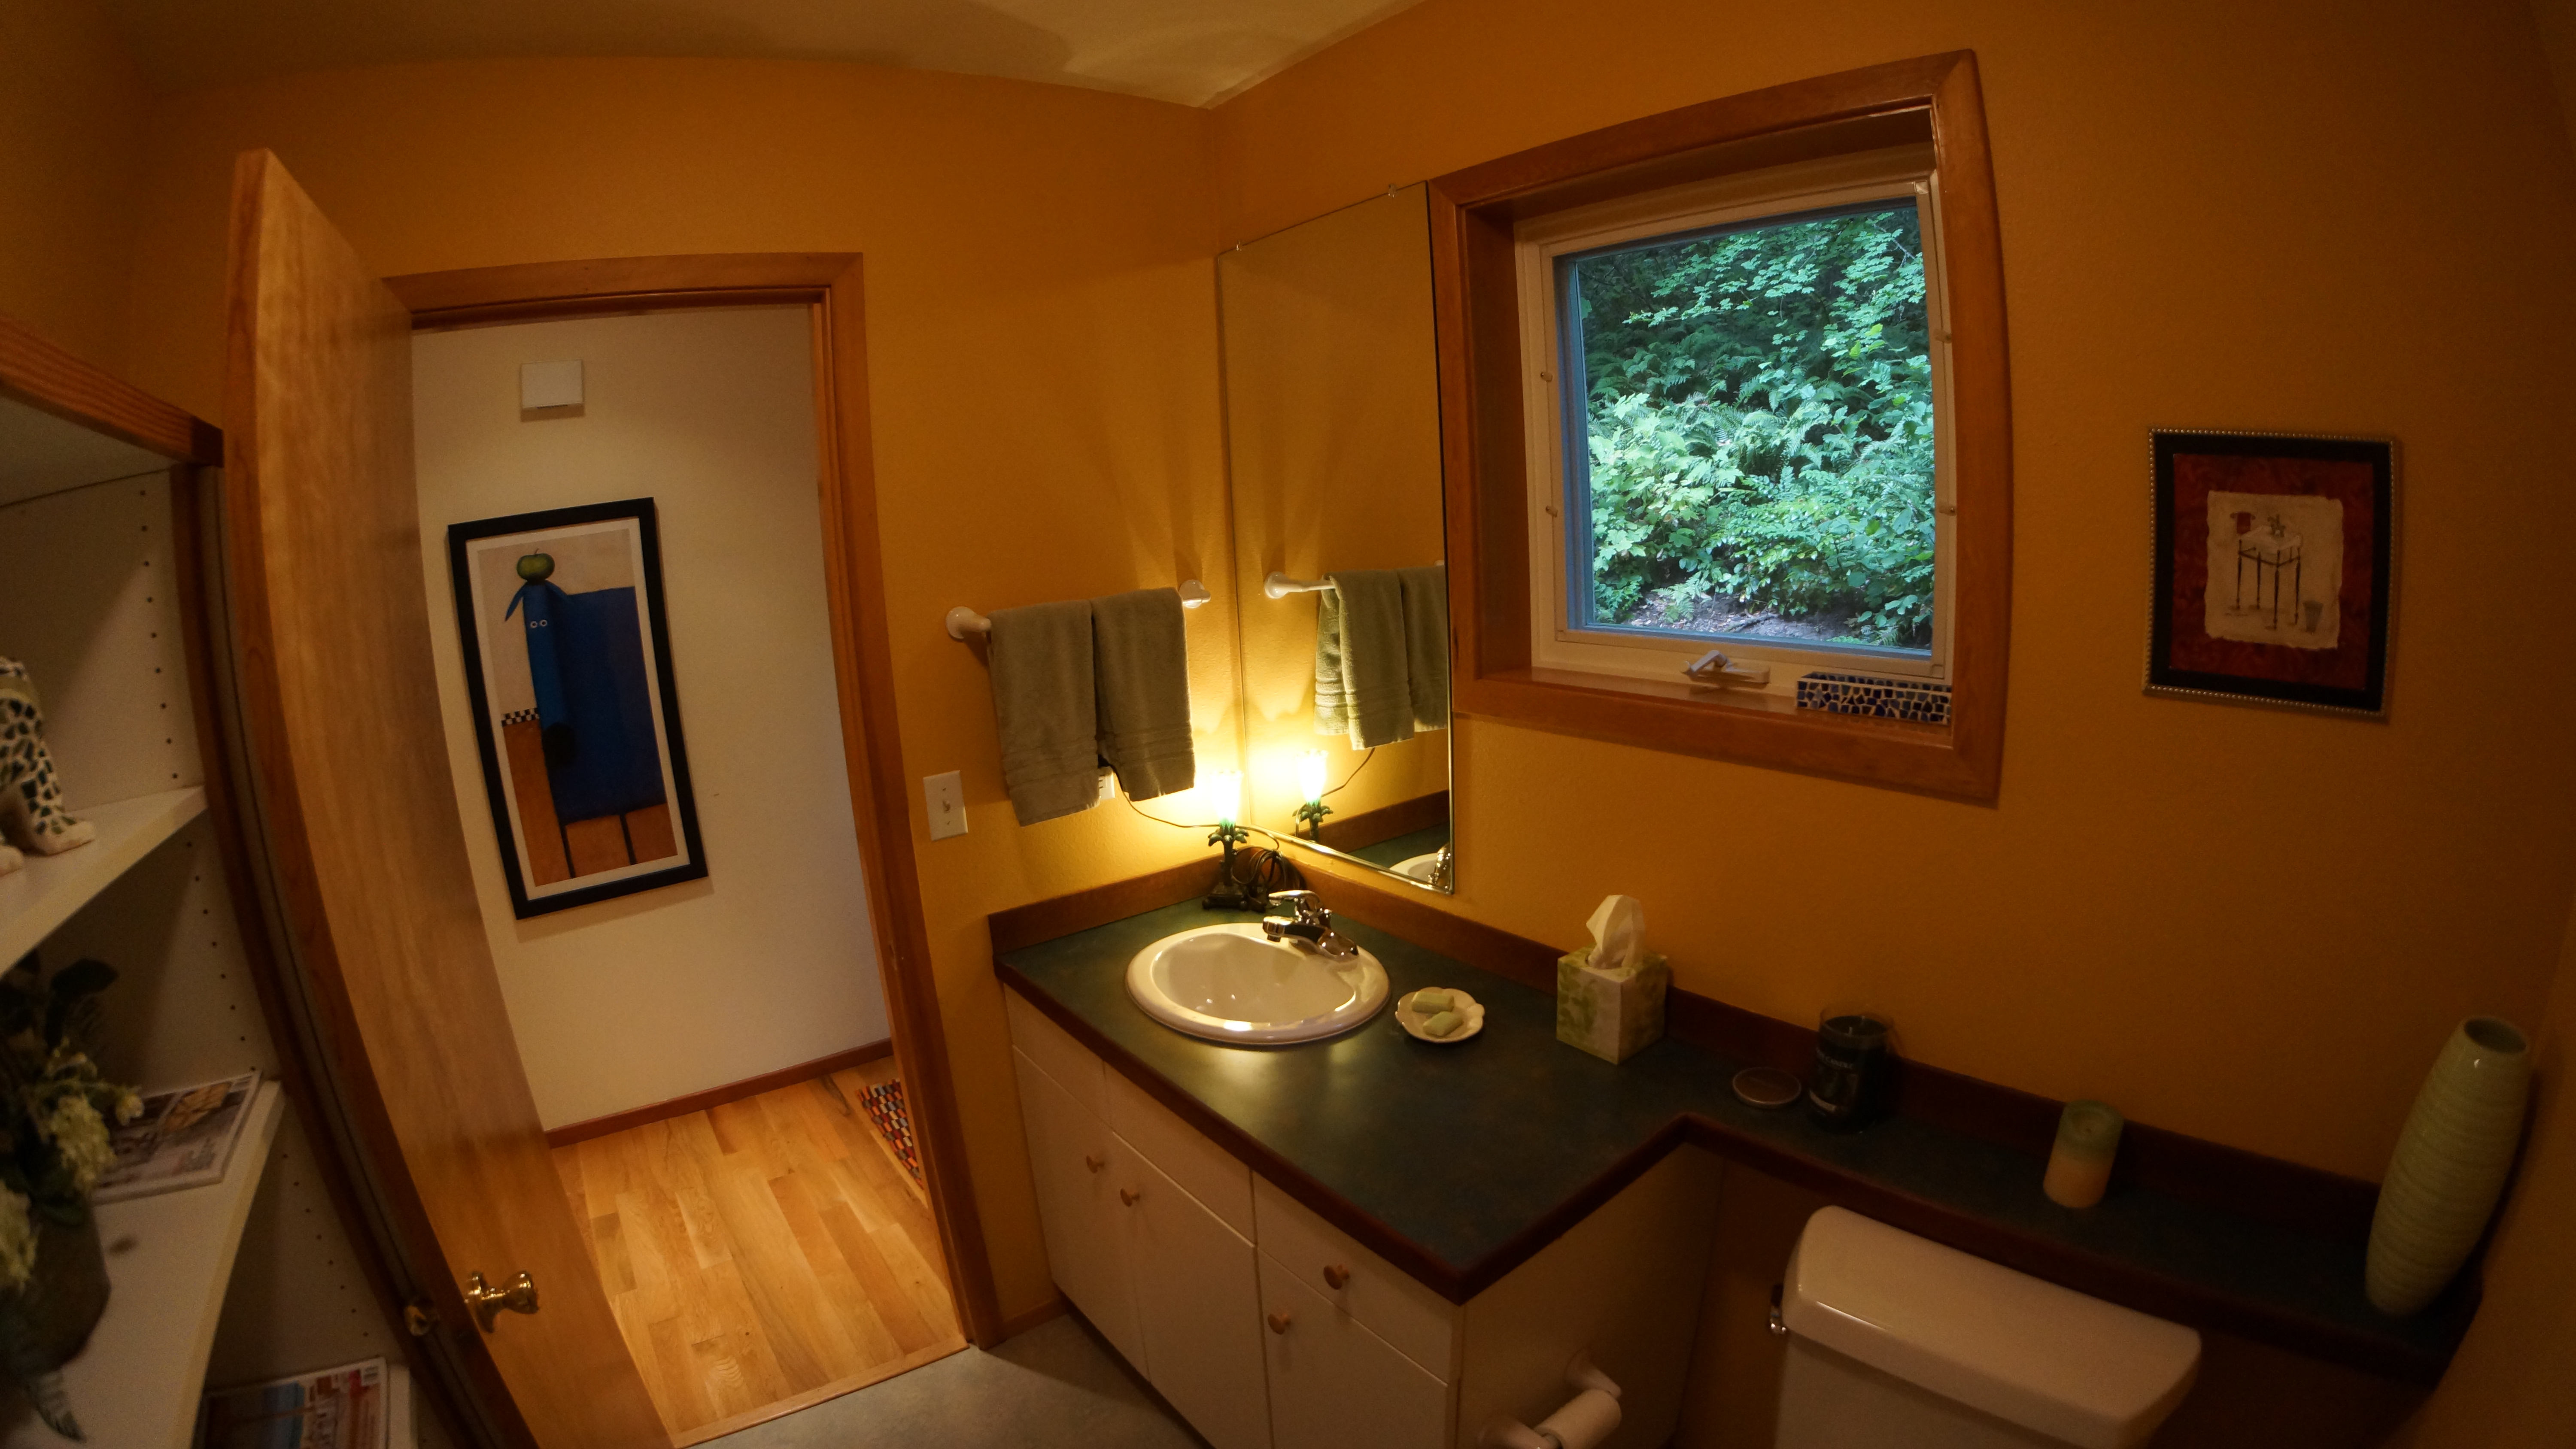 Even your Guest Bathroom has Forest Views.